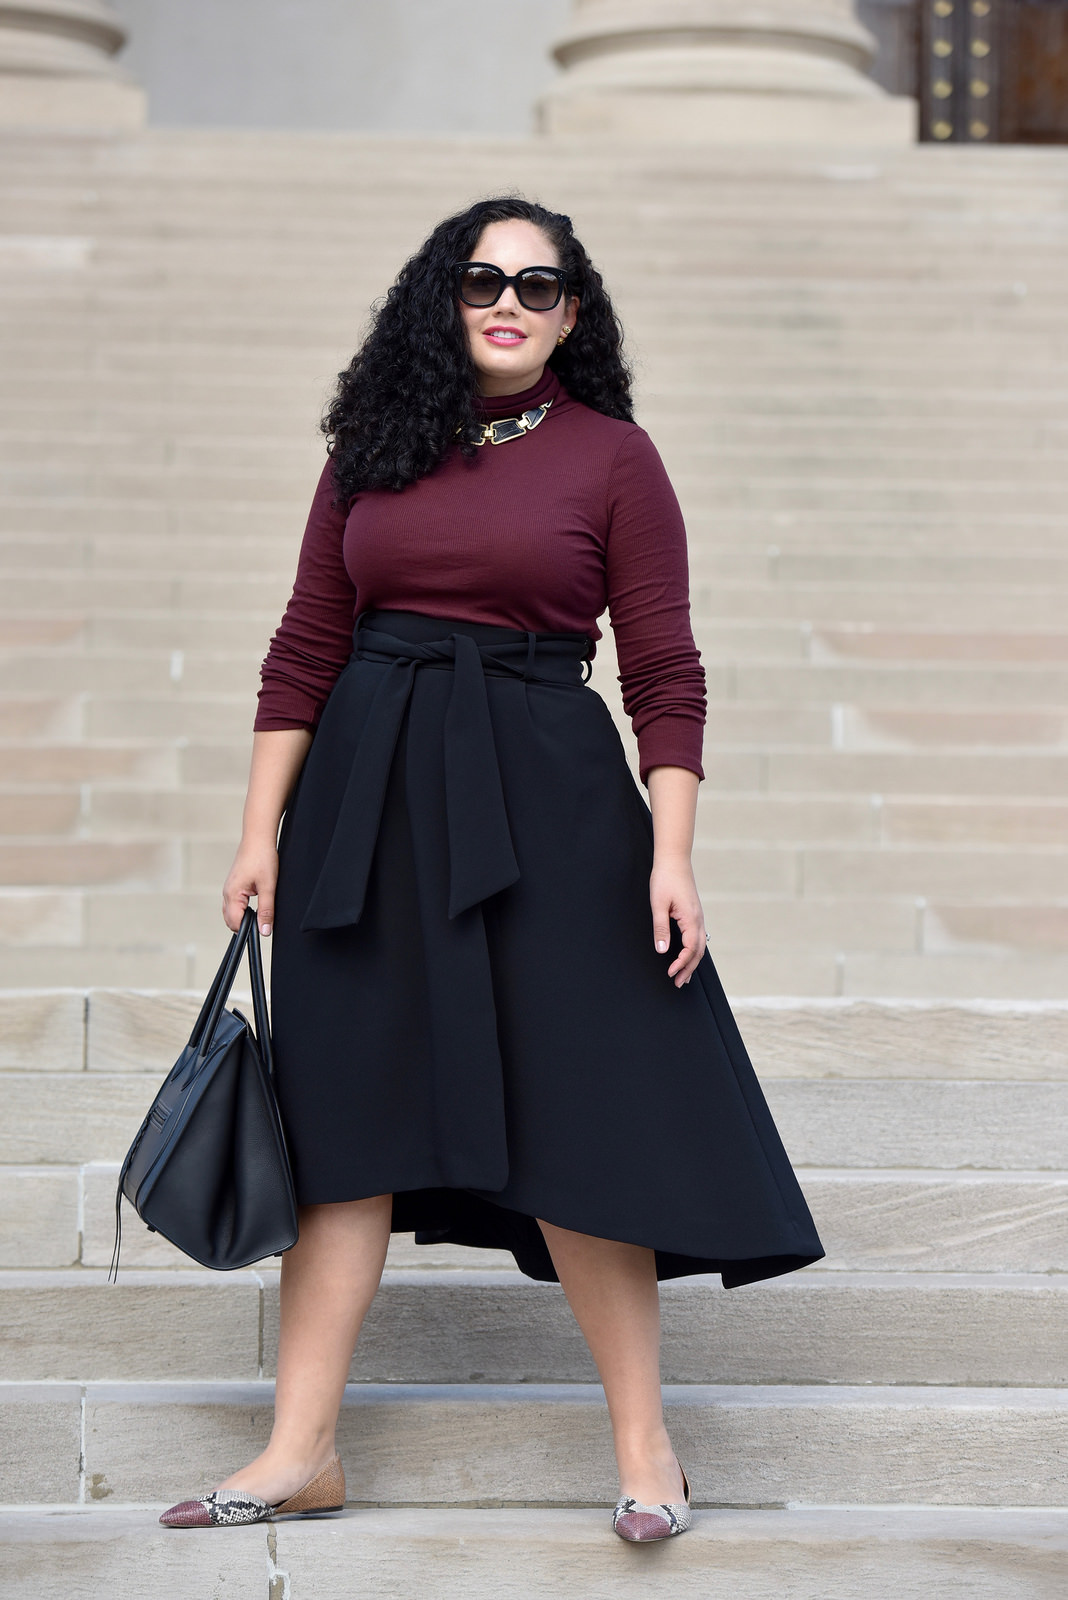 Burgundy Turtleneck, Waist Tie Midi Skirt, Snake print flats and Celine Phantom worn by Tanesha Awasthi, founder of Girl With Curves, at The White House